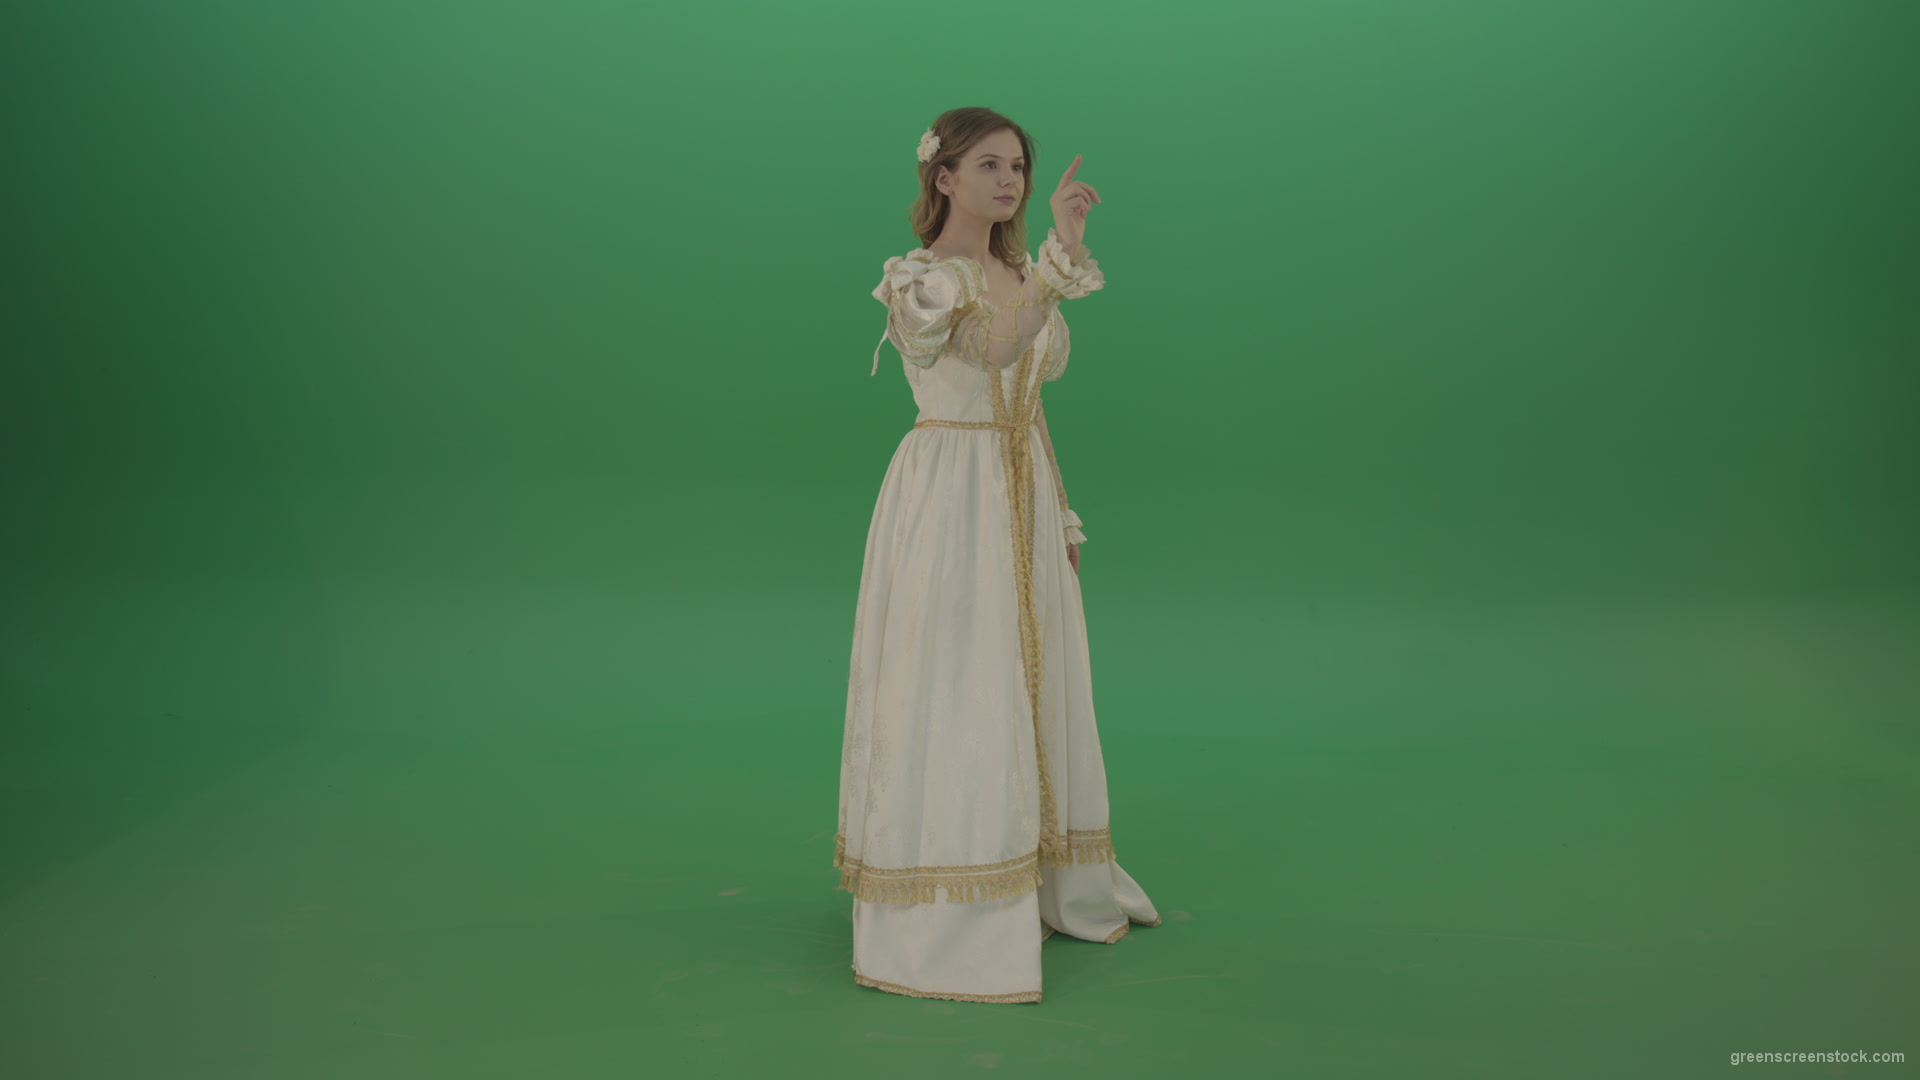 Flips-touchscreen-in-a-white-suit-of-a-medieval-woman-isolated-on-green-screen_006 Green Screen Stock